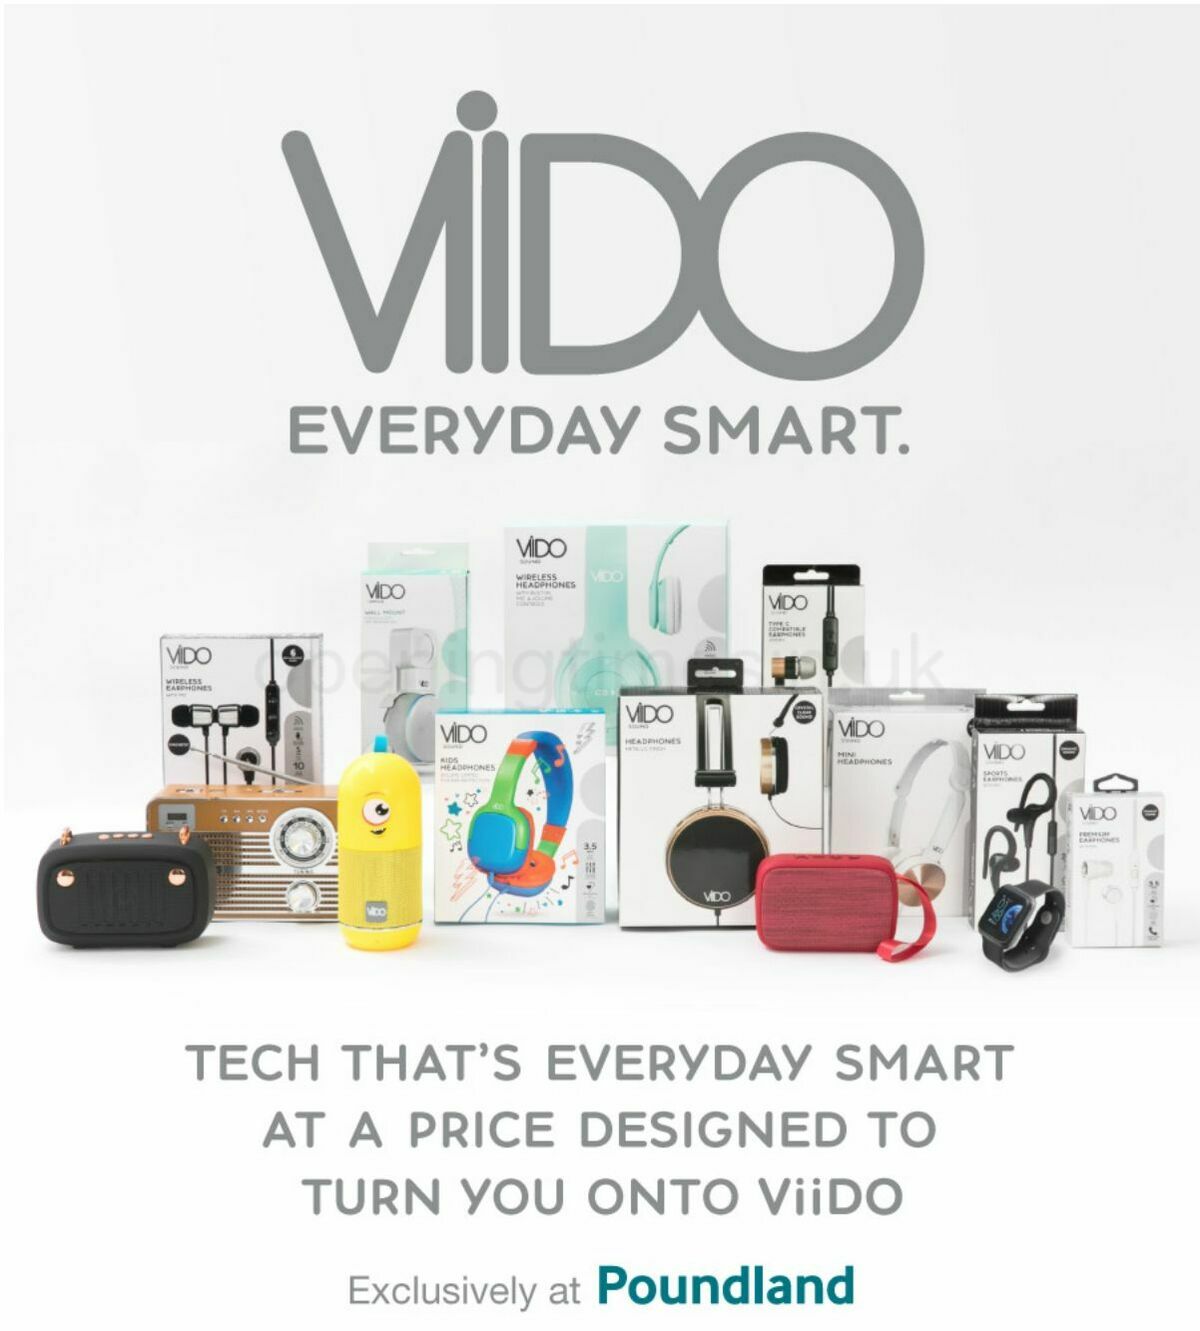 Poundland Viido – tech that's everyday smart Offers from 16 November